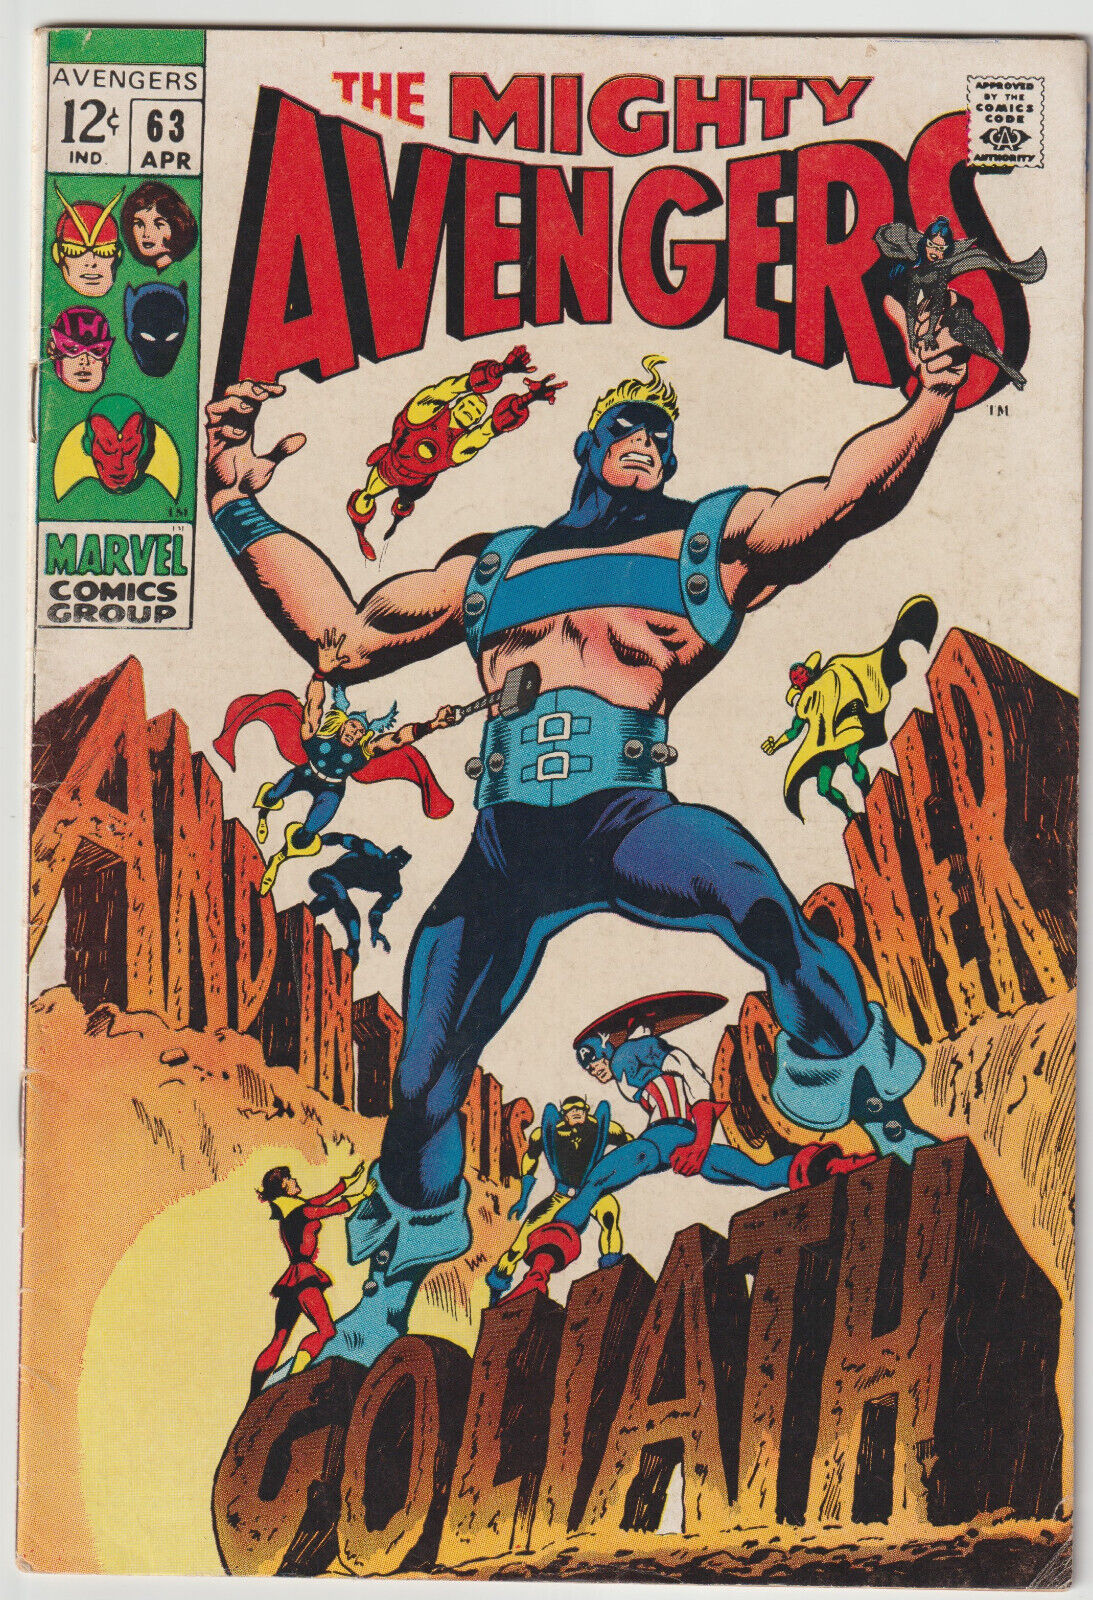 Avengers #63 (Apr 1969, Marvel), VG (4.0), Hawkeye becomes the new Goliath